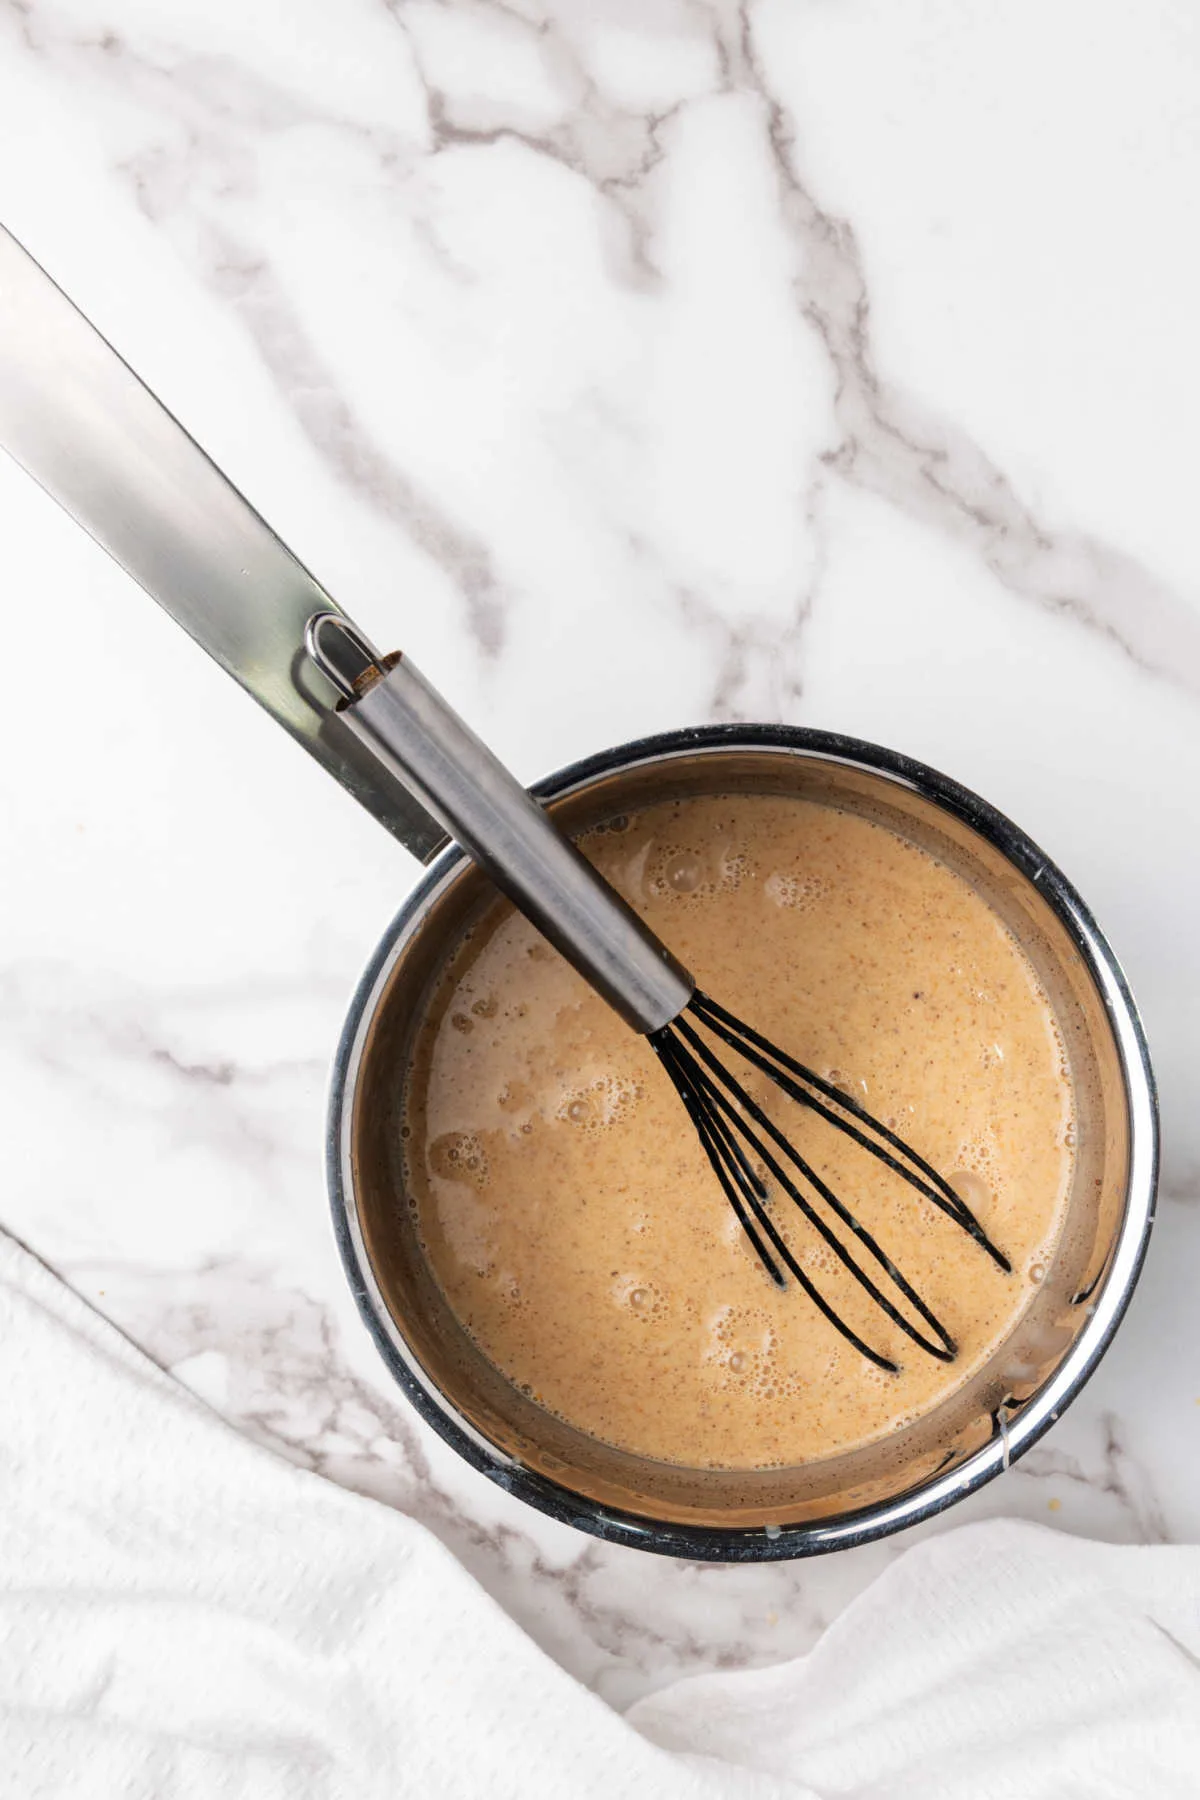 Saucepan of pumpkin spice coffee creamer with whisk.